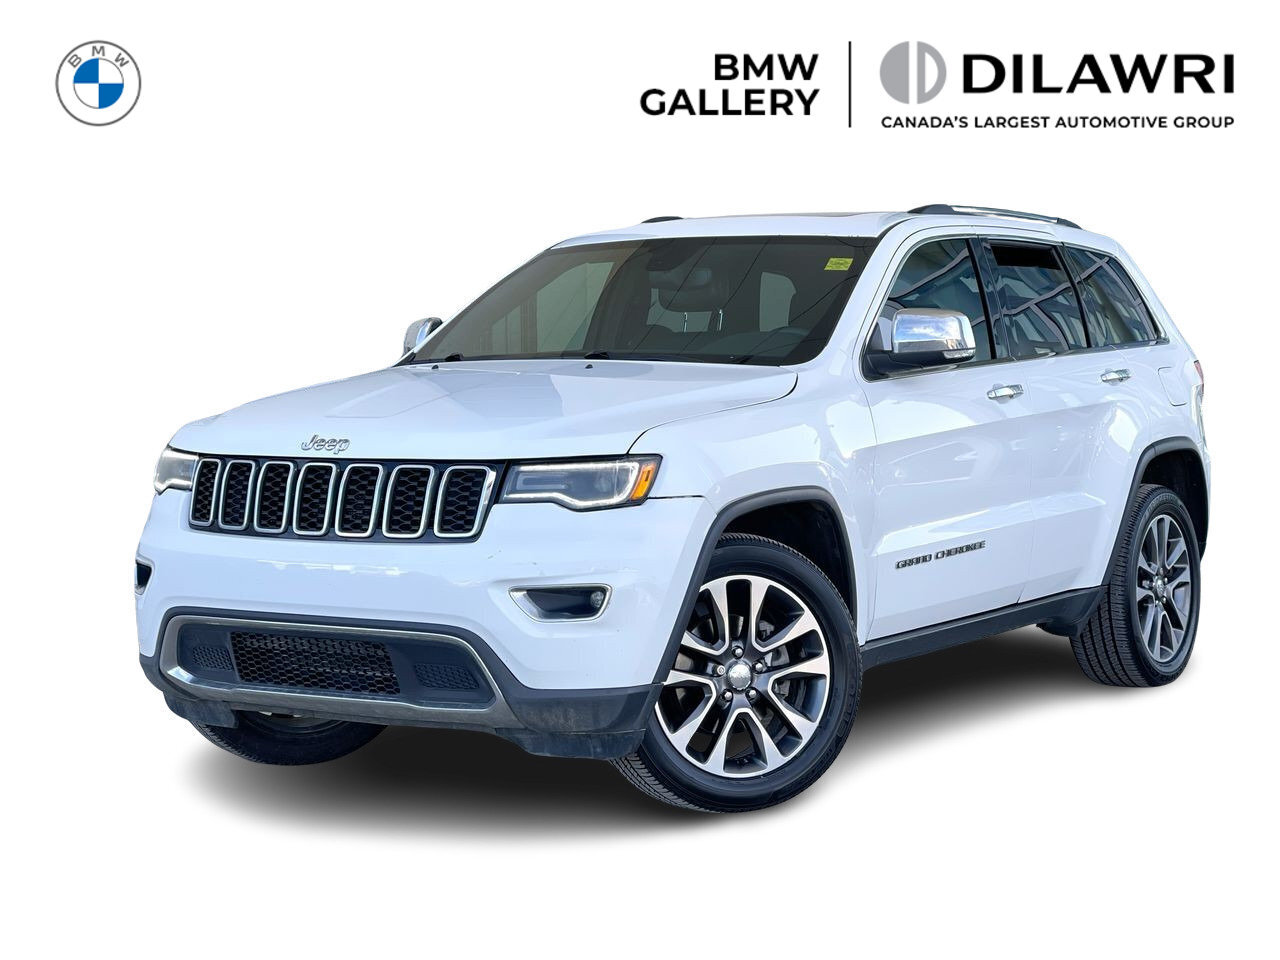 2018 Jeep Grand Cherokee Limited 4x4, Leather, Blind Spot Monitoring / 